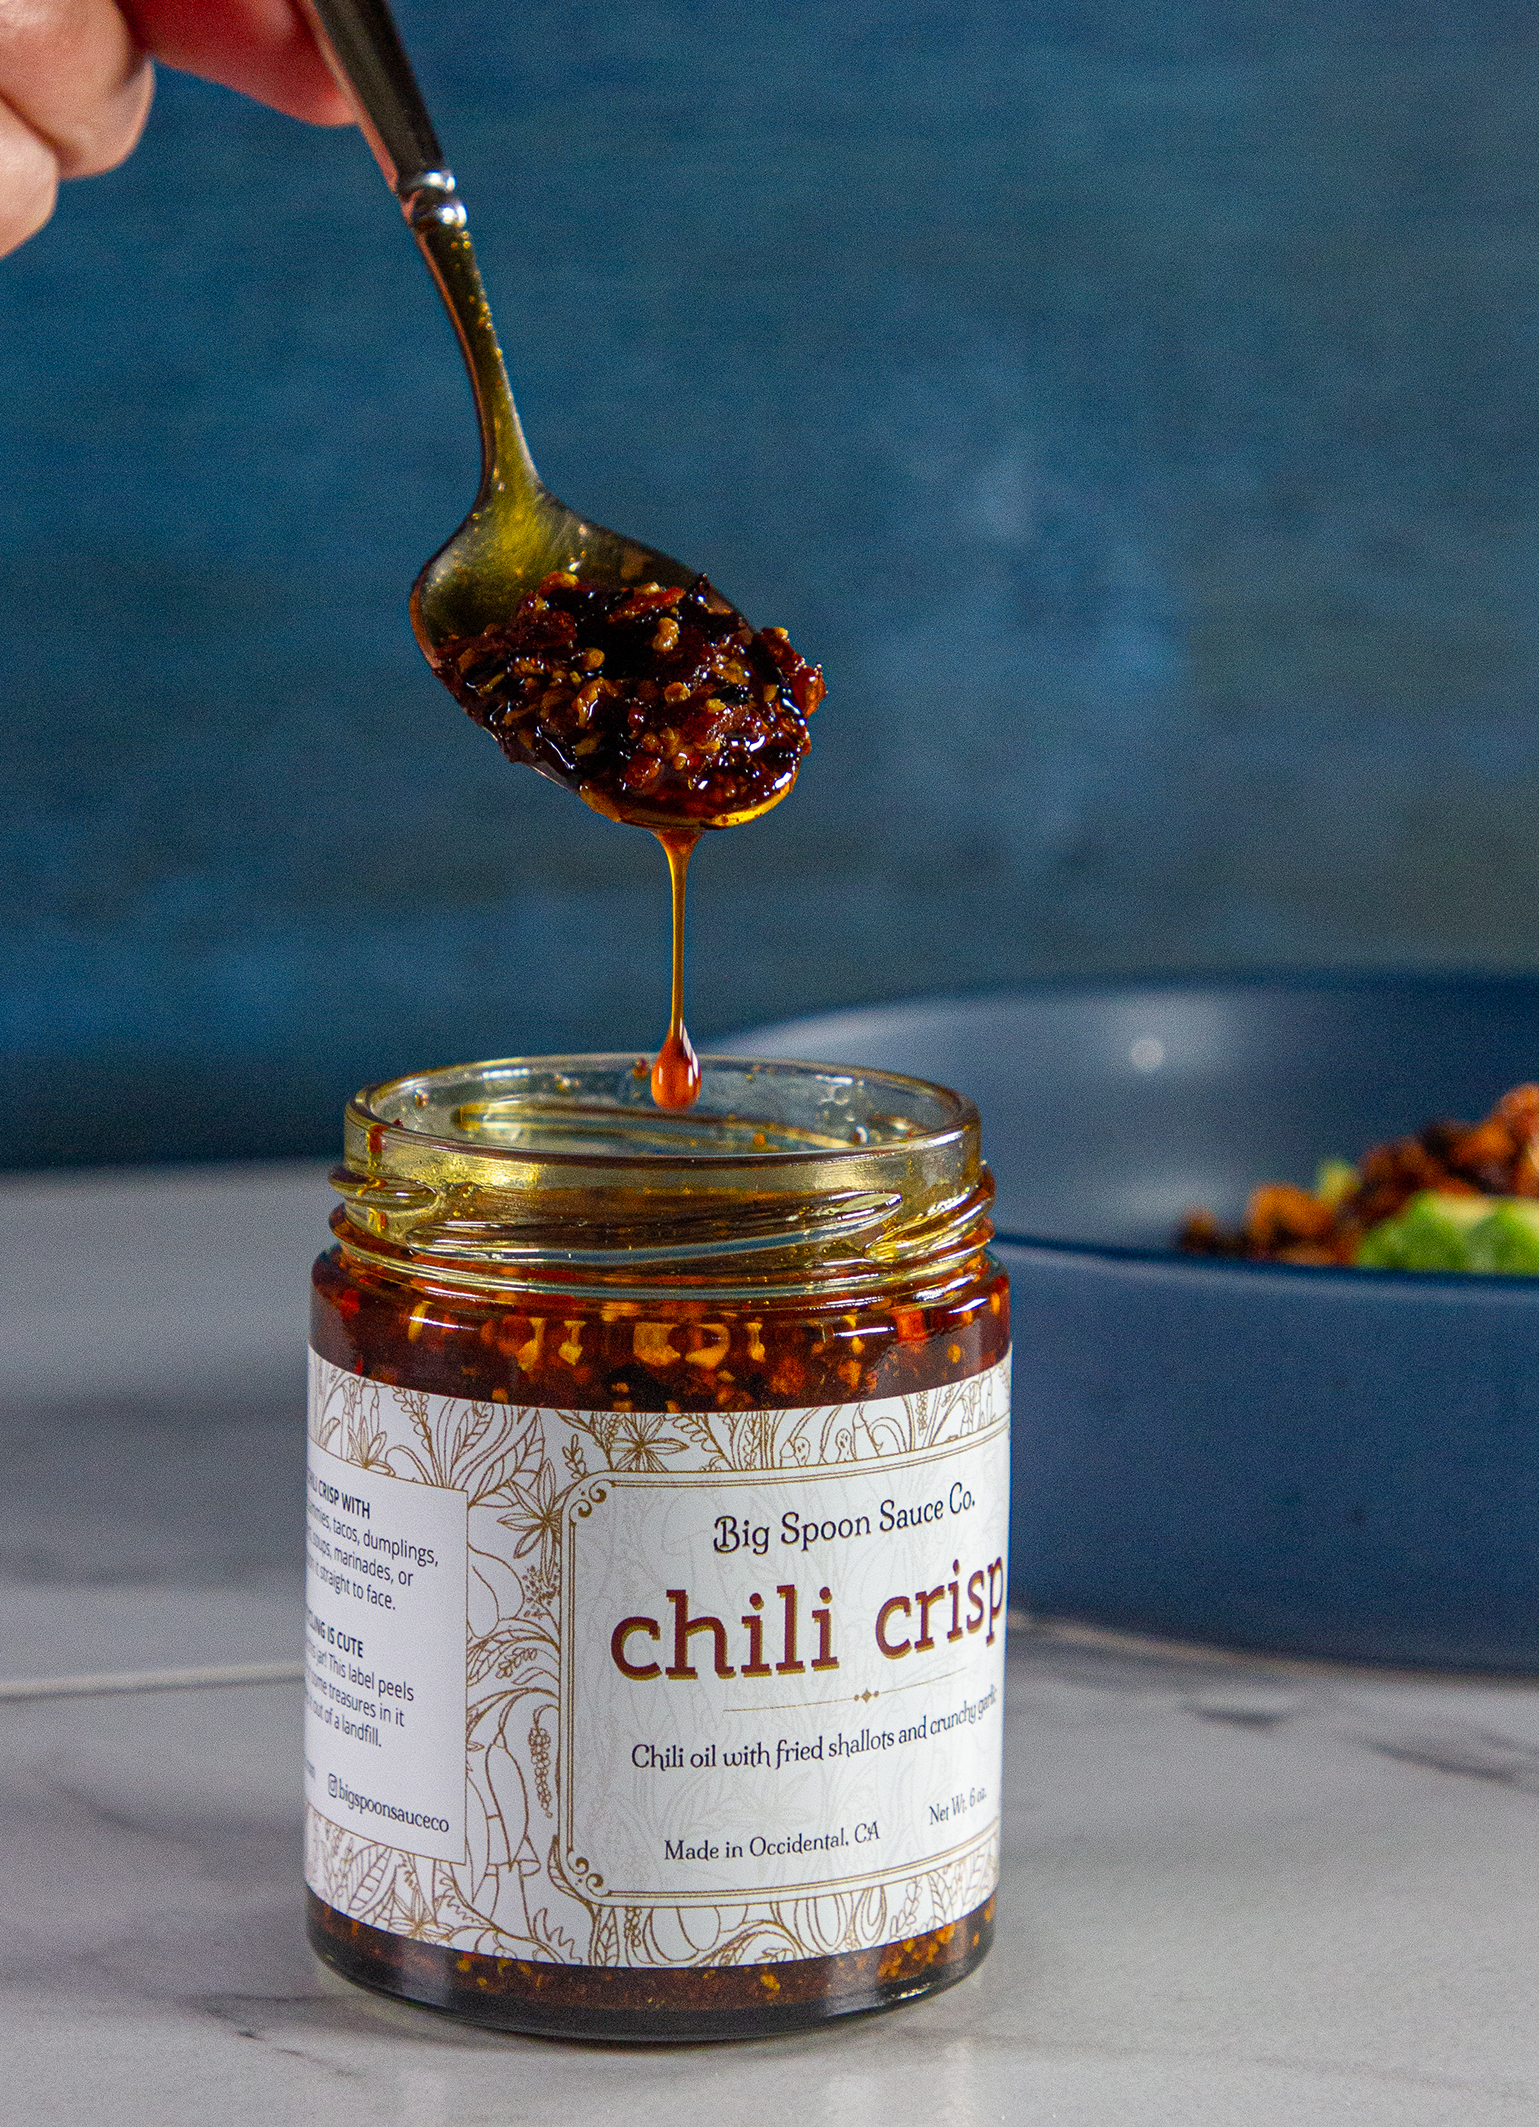 Chili crisp from Big Spoon Sauce Co. in Occidental. (Nathan Bender)